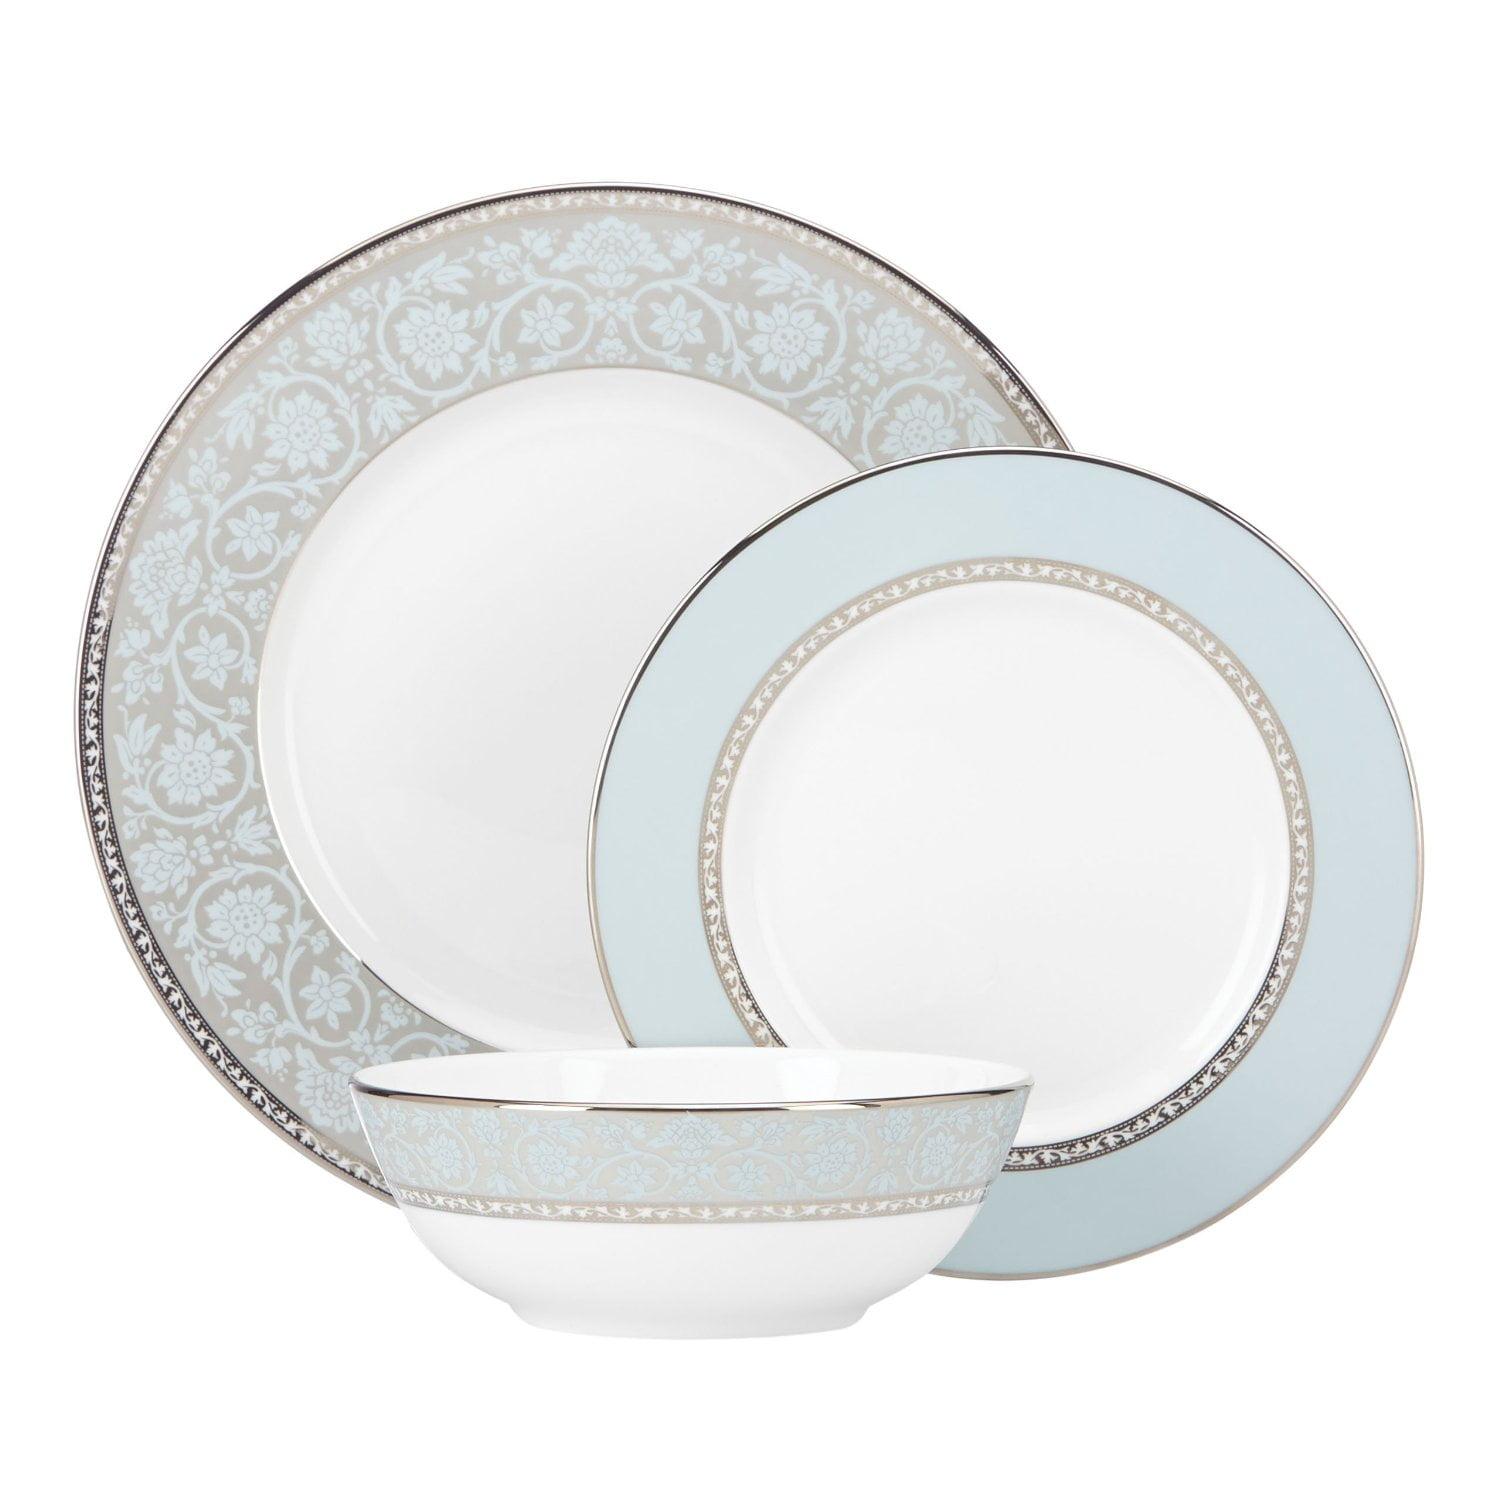 Westmore Serene Blue and White Porcelain 3-Piece Place Setting